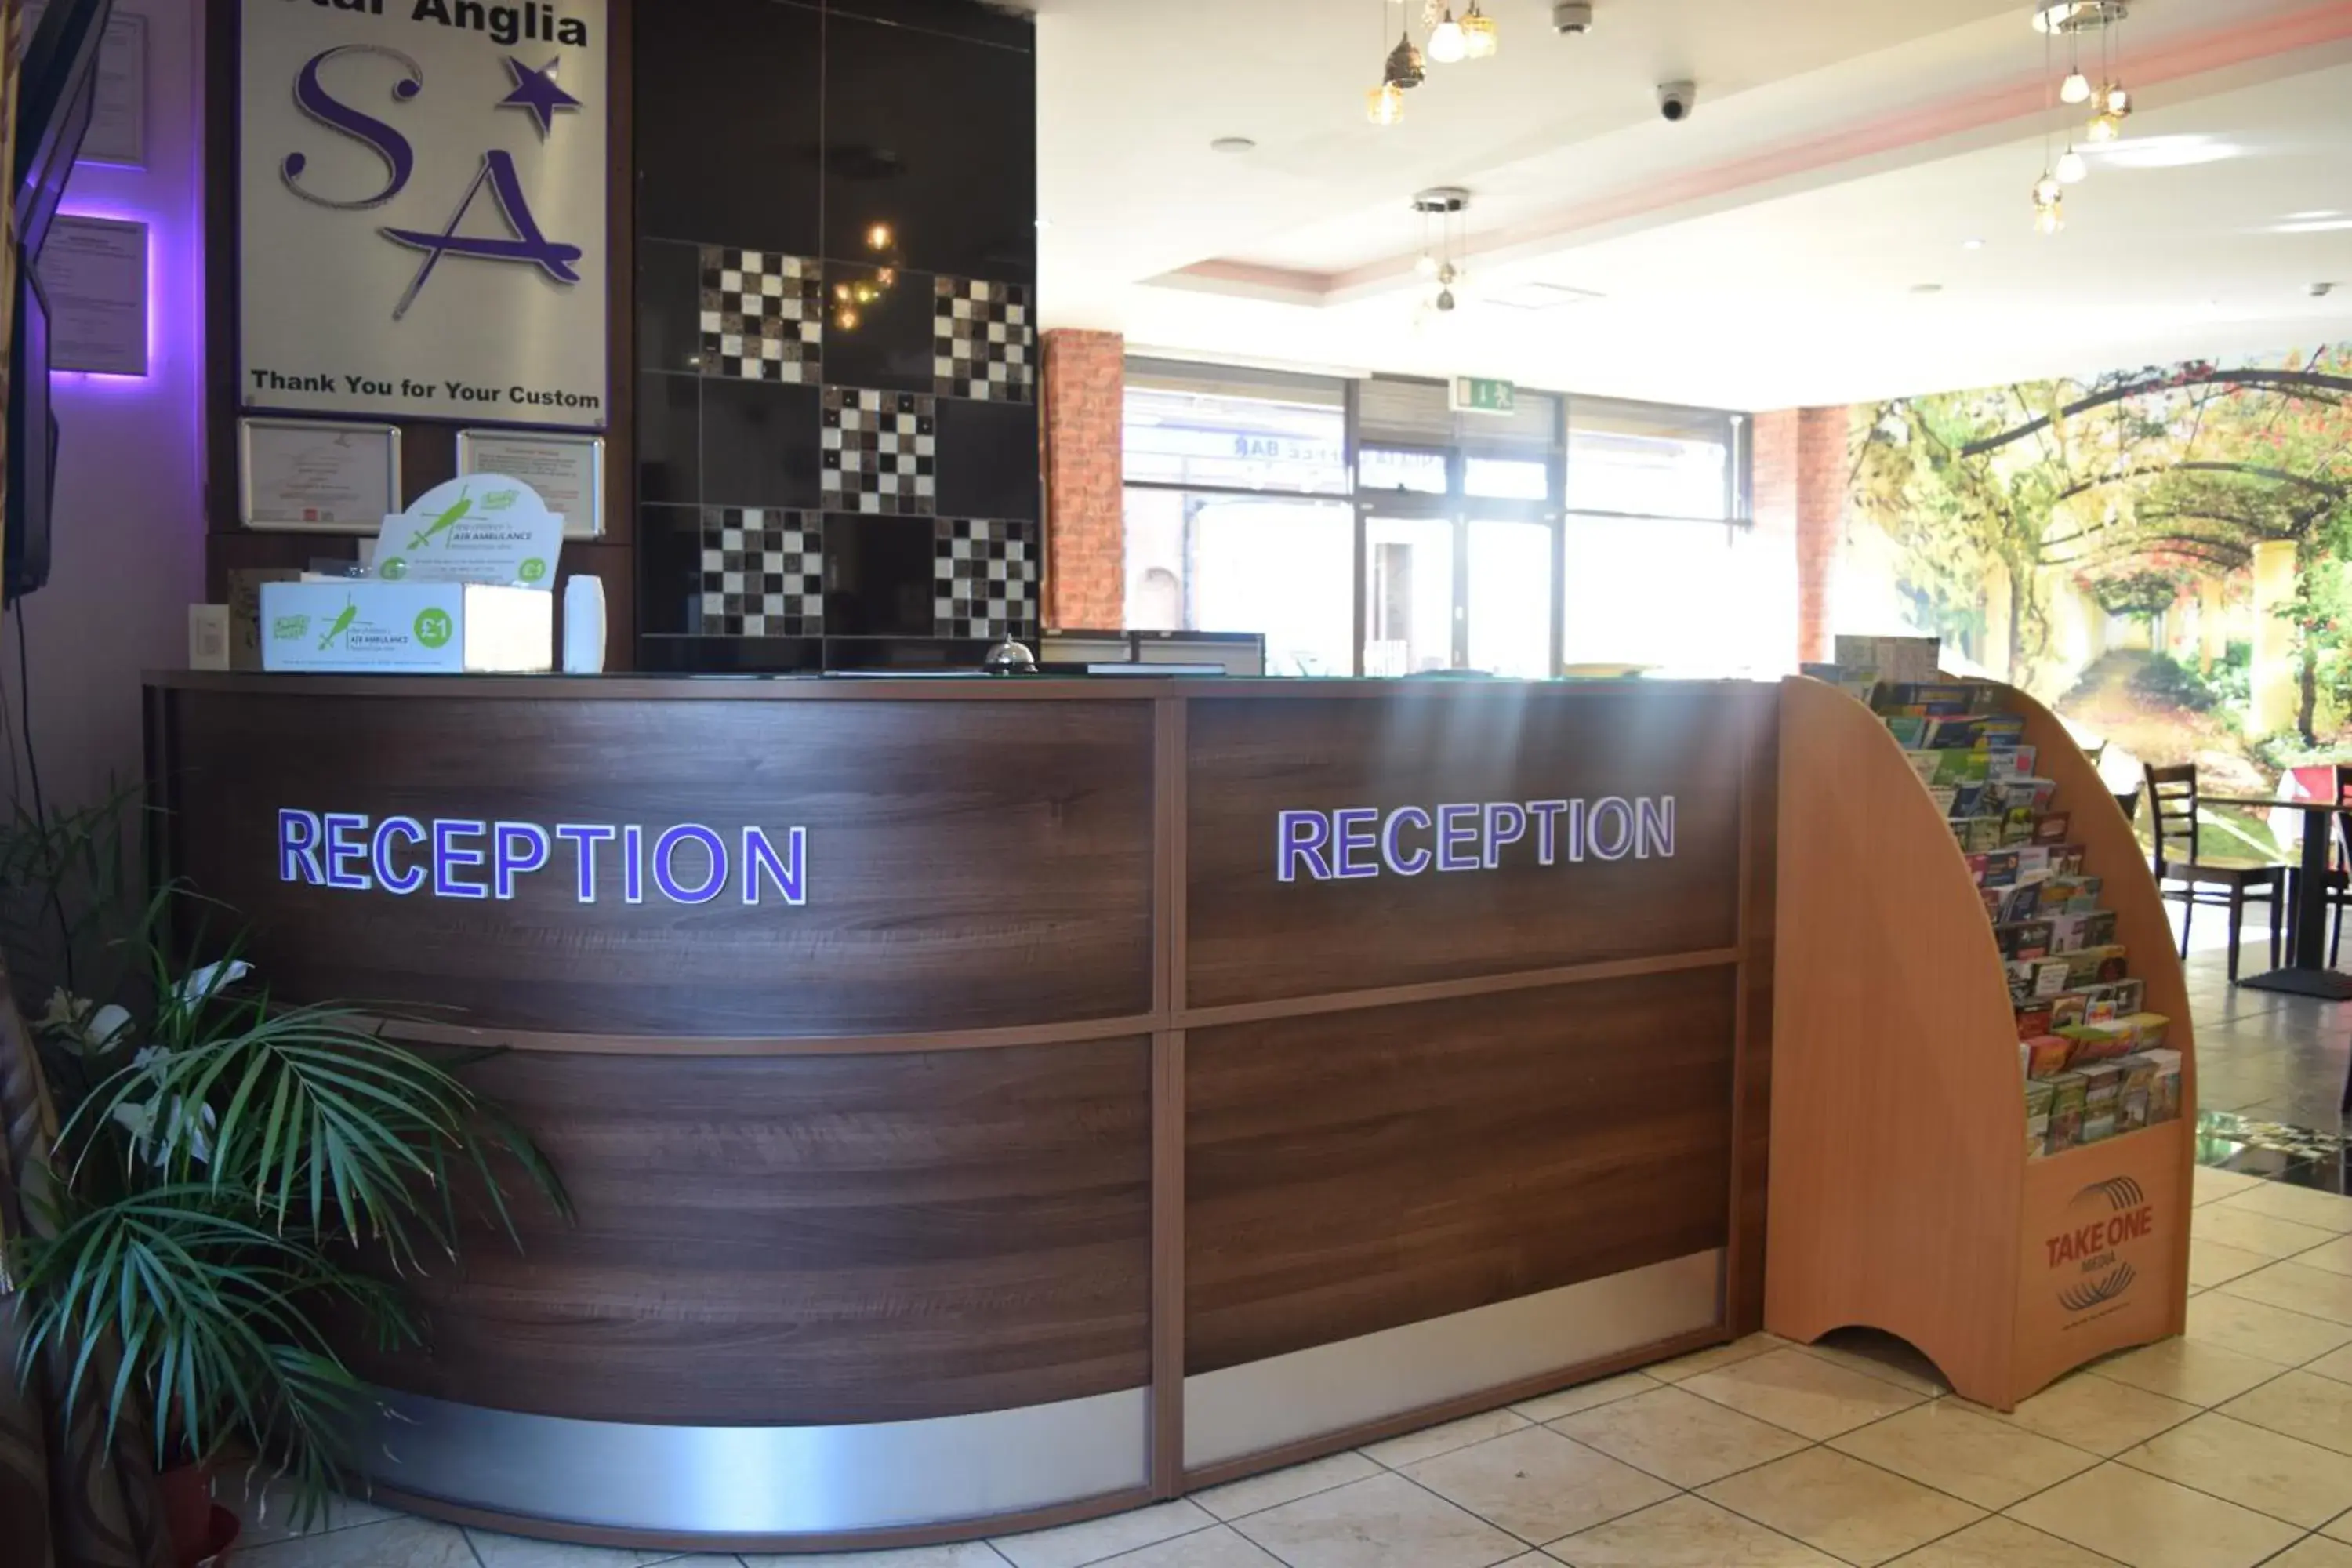 On site, Lobby/Reception in Star Anglia Hotel